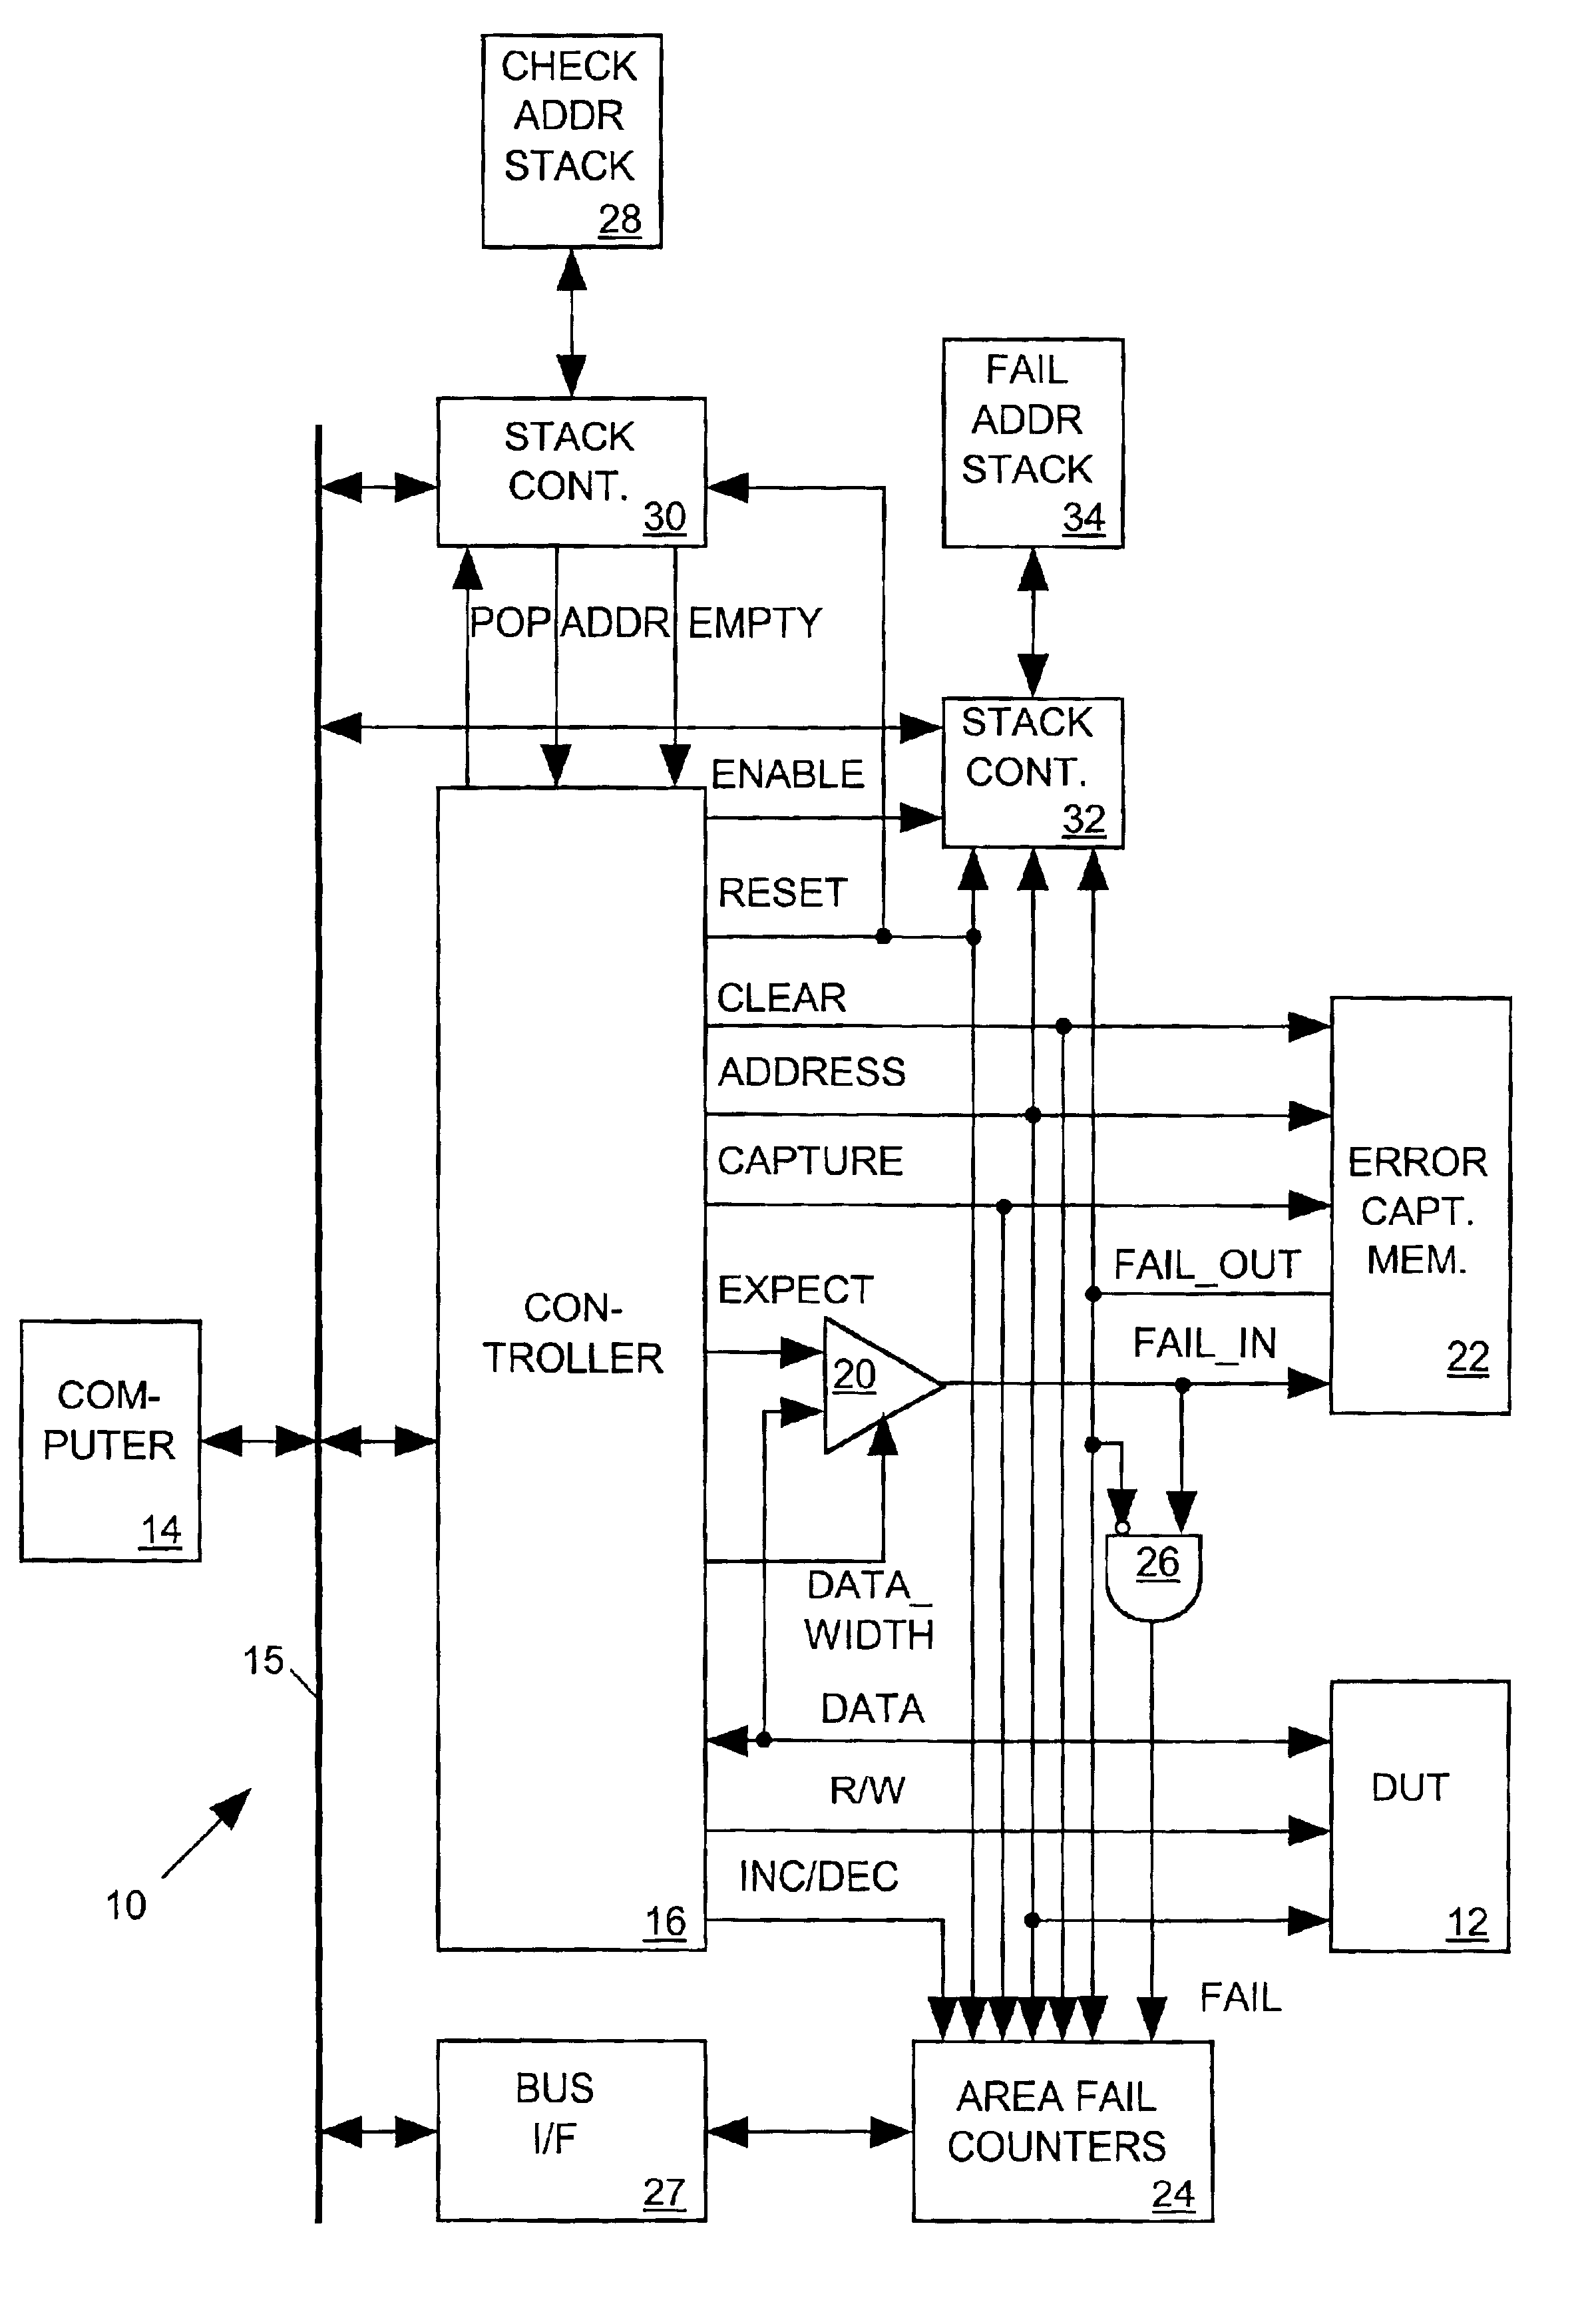 Apparatus for testing memories with redundant storage elements